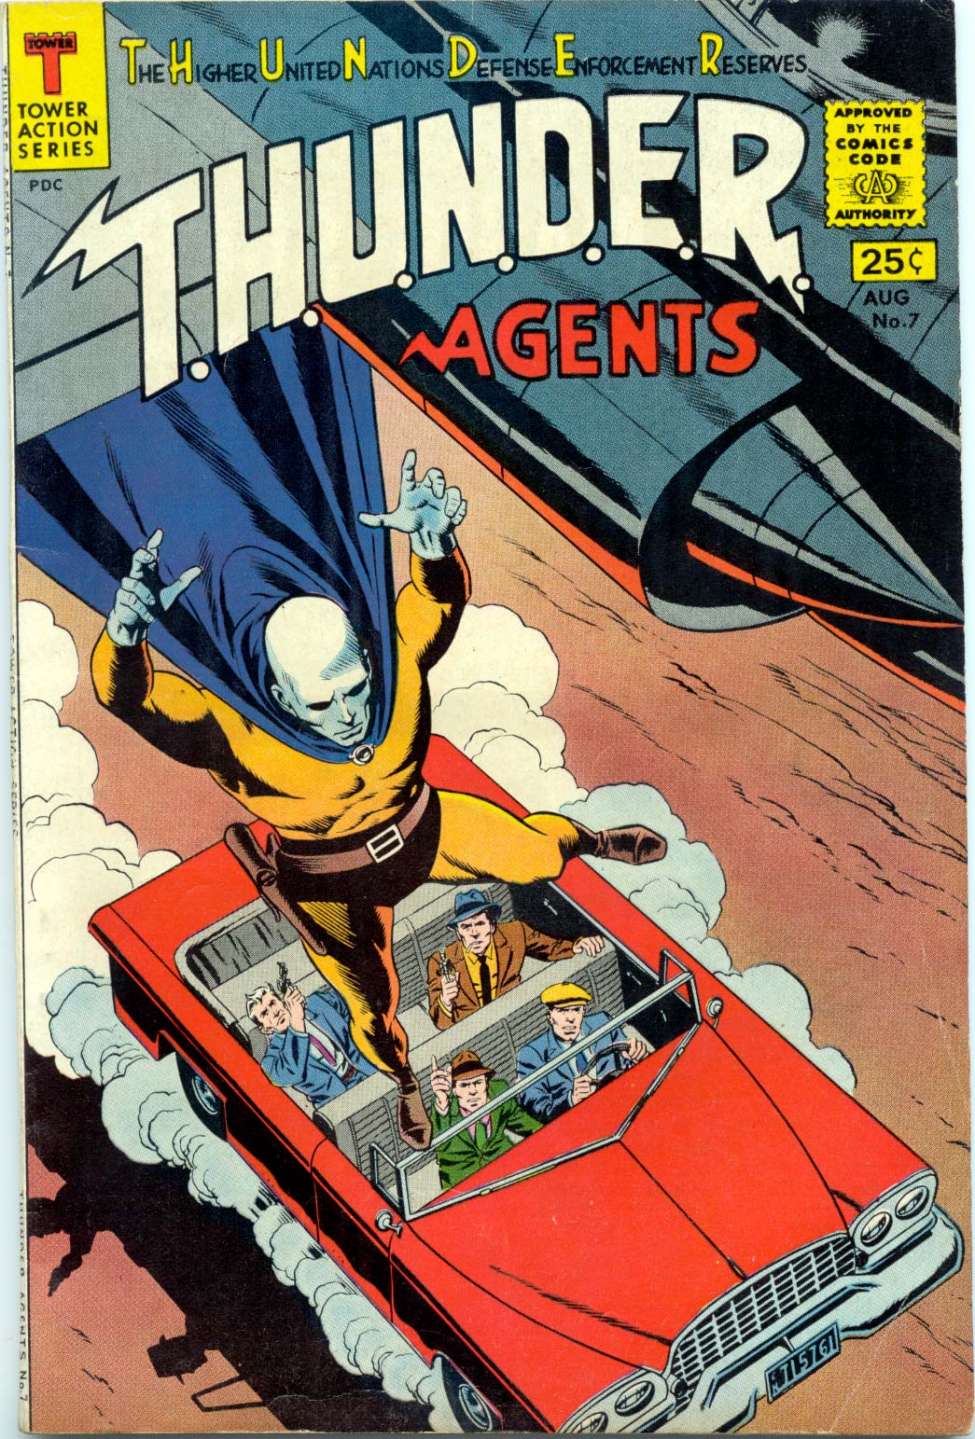 Book Cover For T.H.U.N.D.E.R. Agents 7